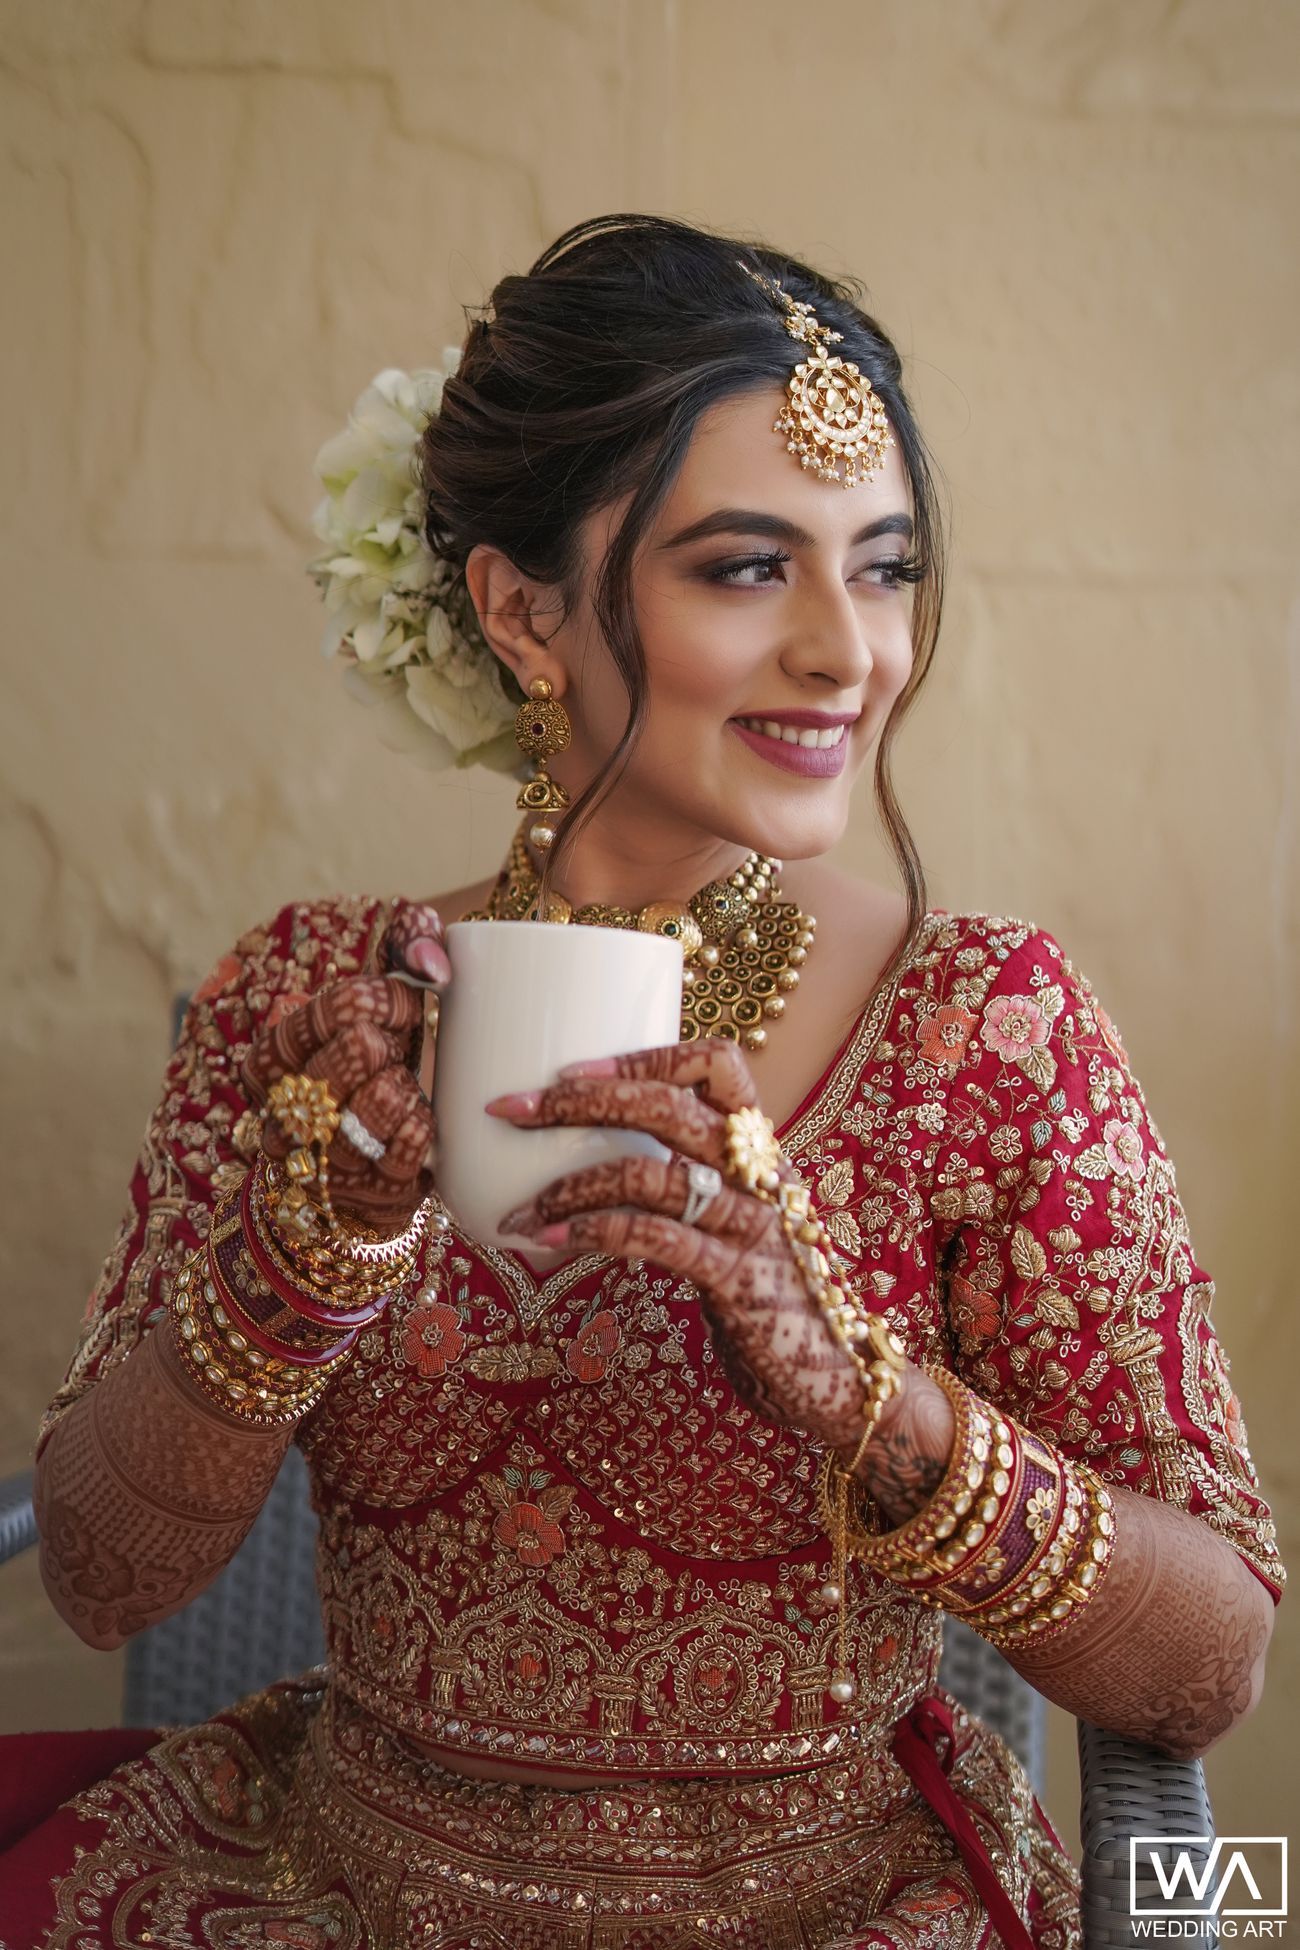 Stunning Bridal Hairstyles for Indian Weddings: Traditional Elegance and Modern Glamour